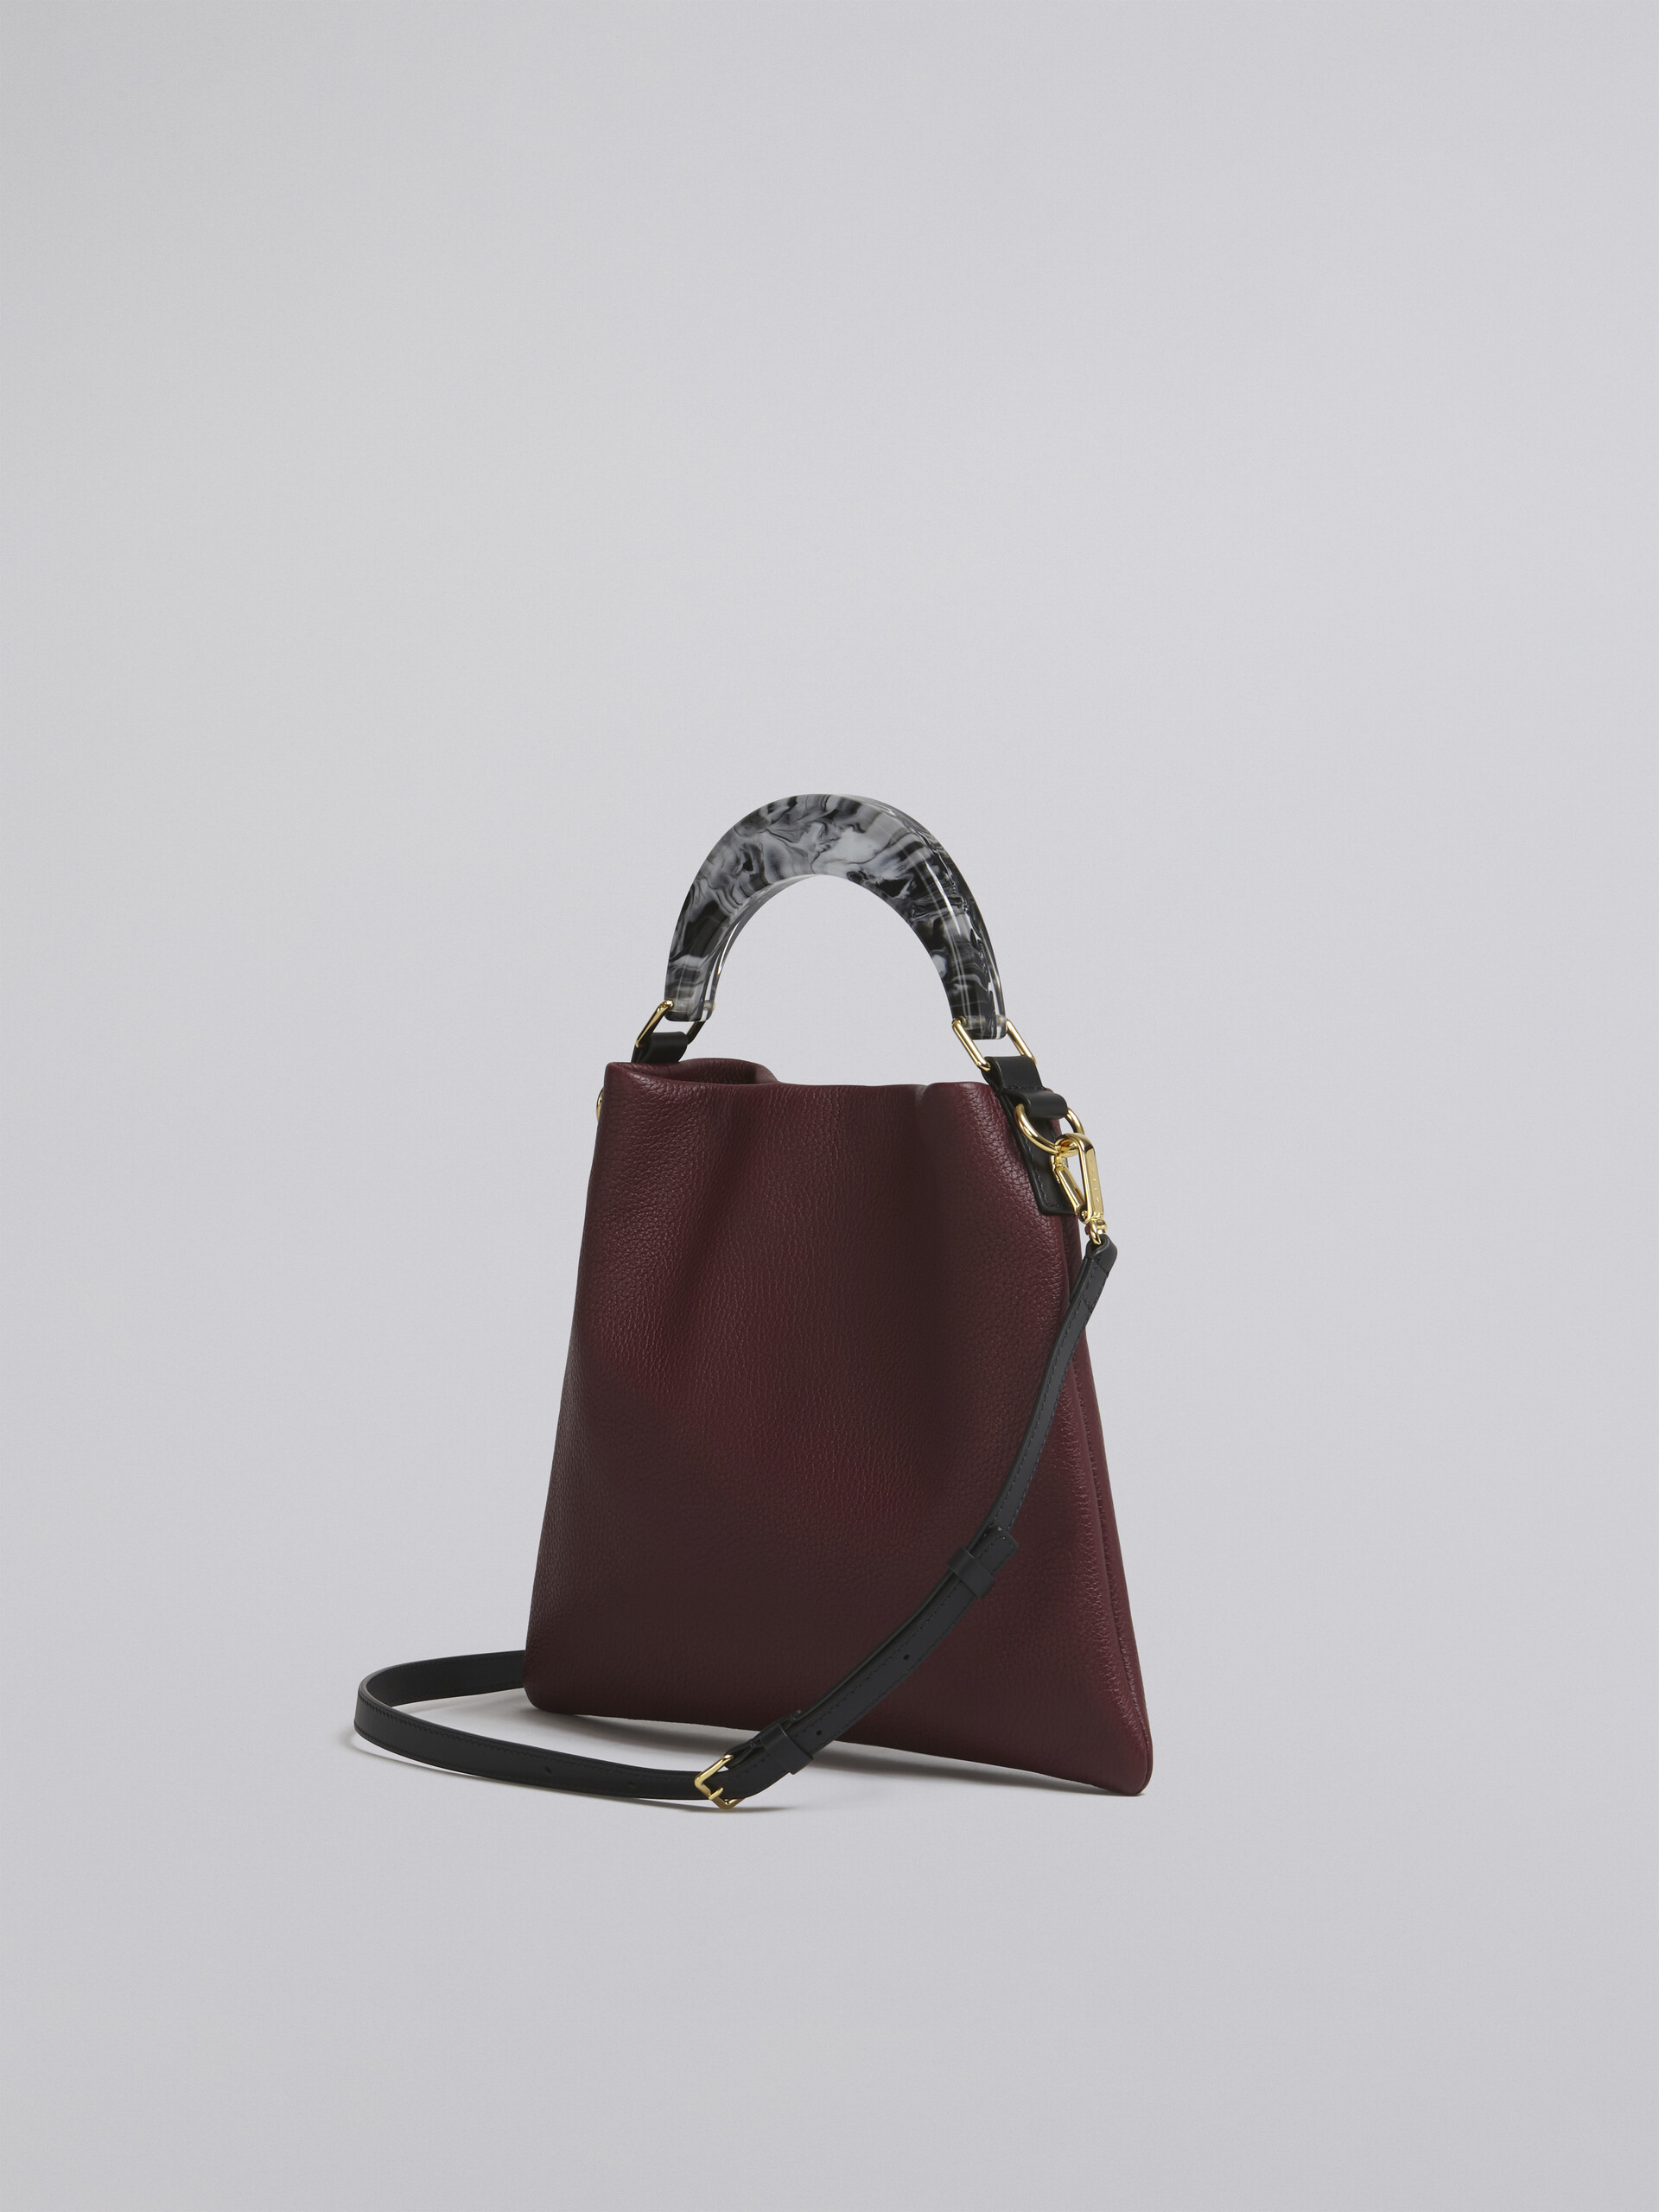 Venice small bag in red leather - Shoulder Bag - Image 2